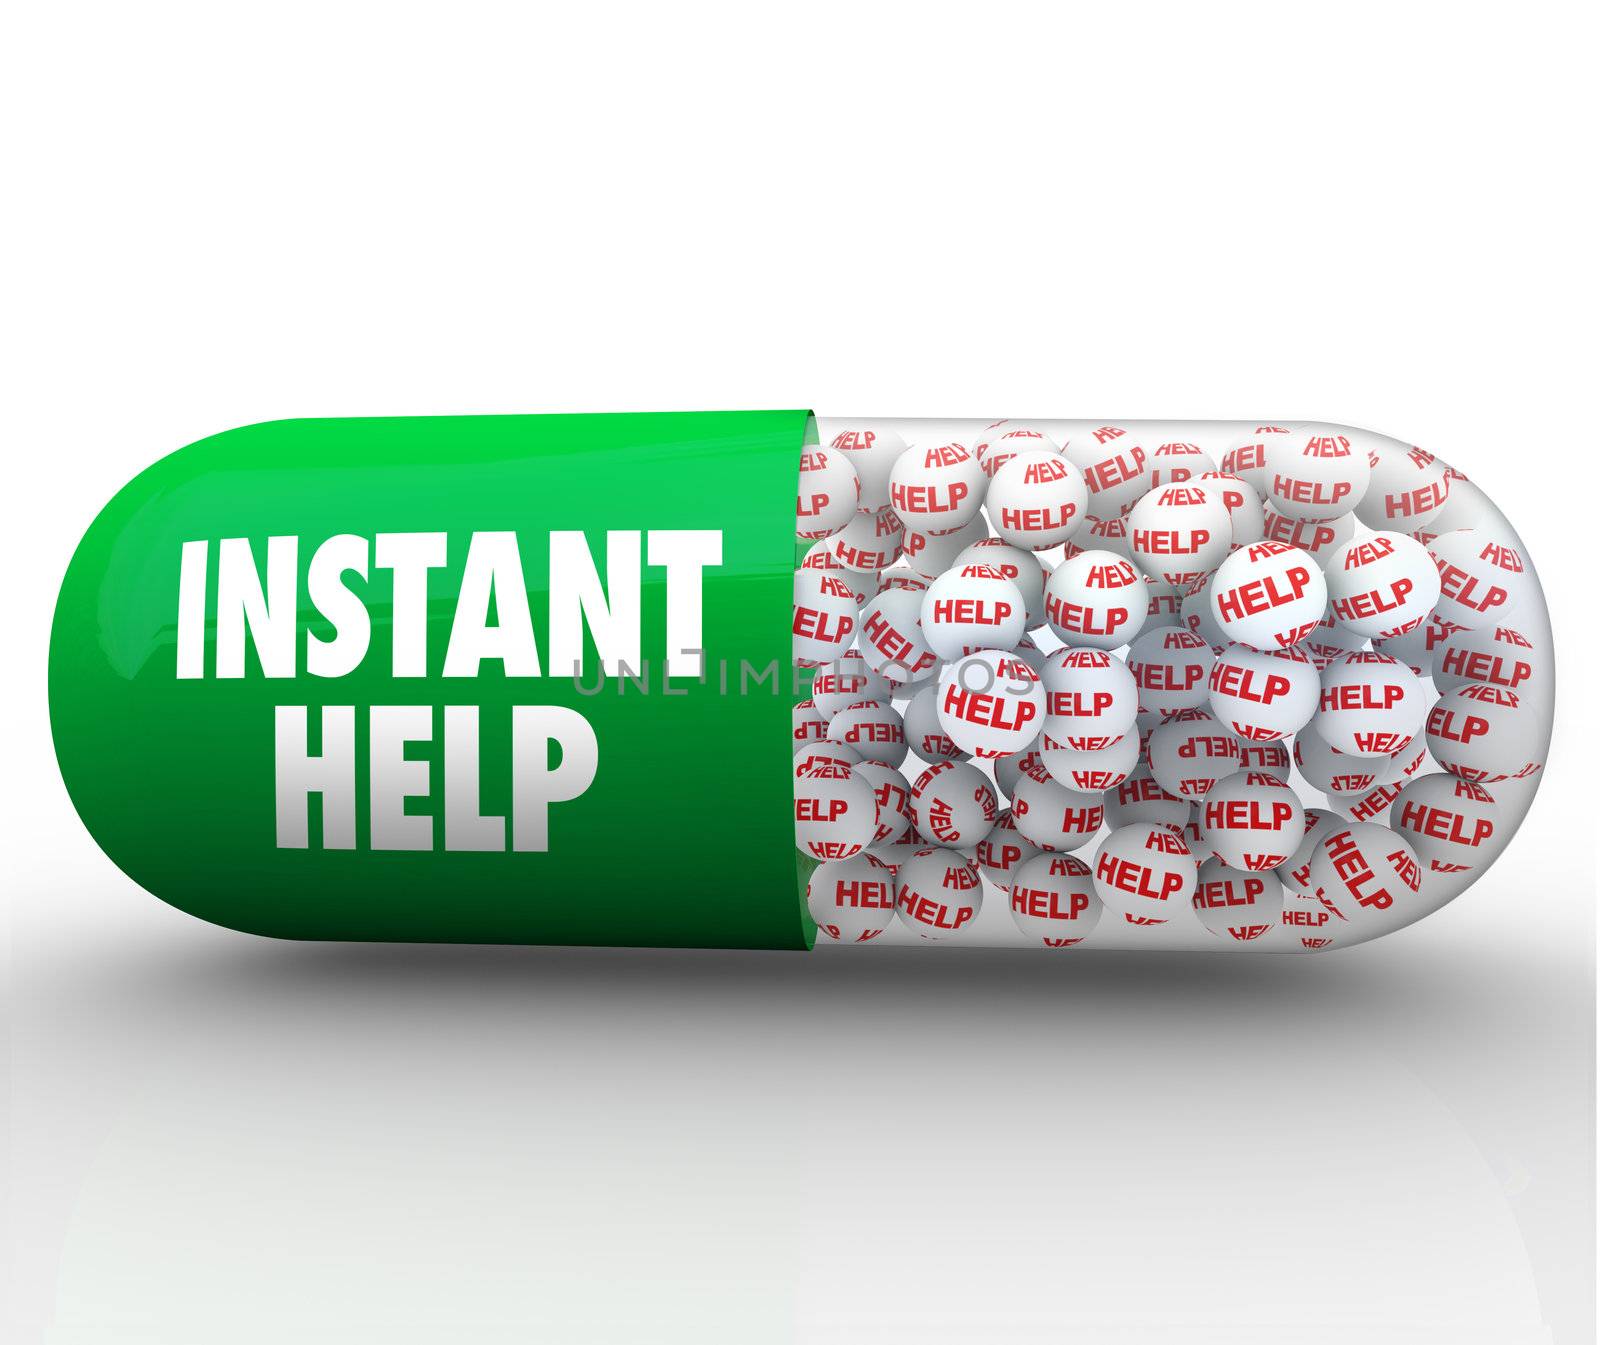 A green capsule pill with the words Instant Help filled with medication balls reading Help, illustrating the quick relief that the right pharmaceutical medicines can provide when your ill or in pain or discomfort